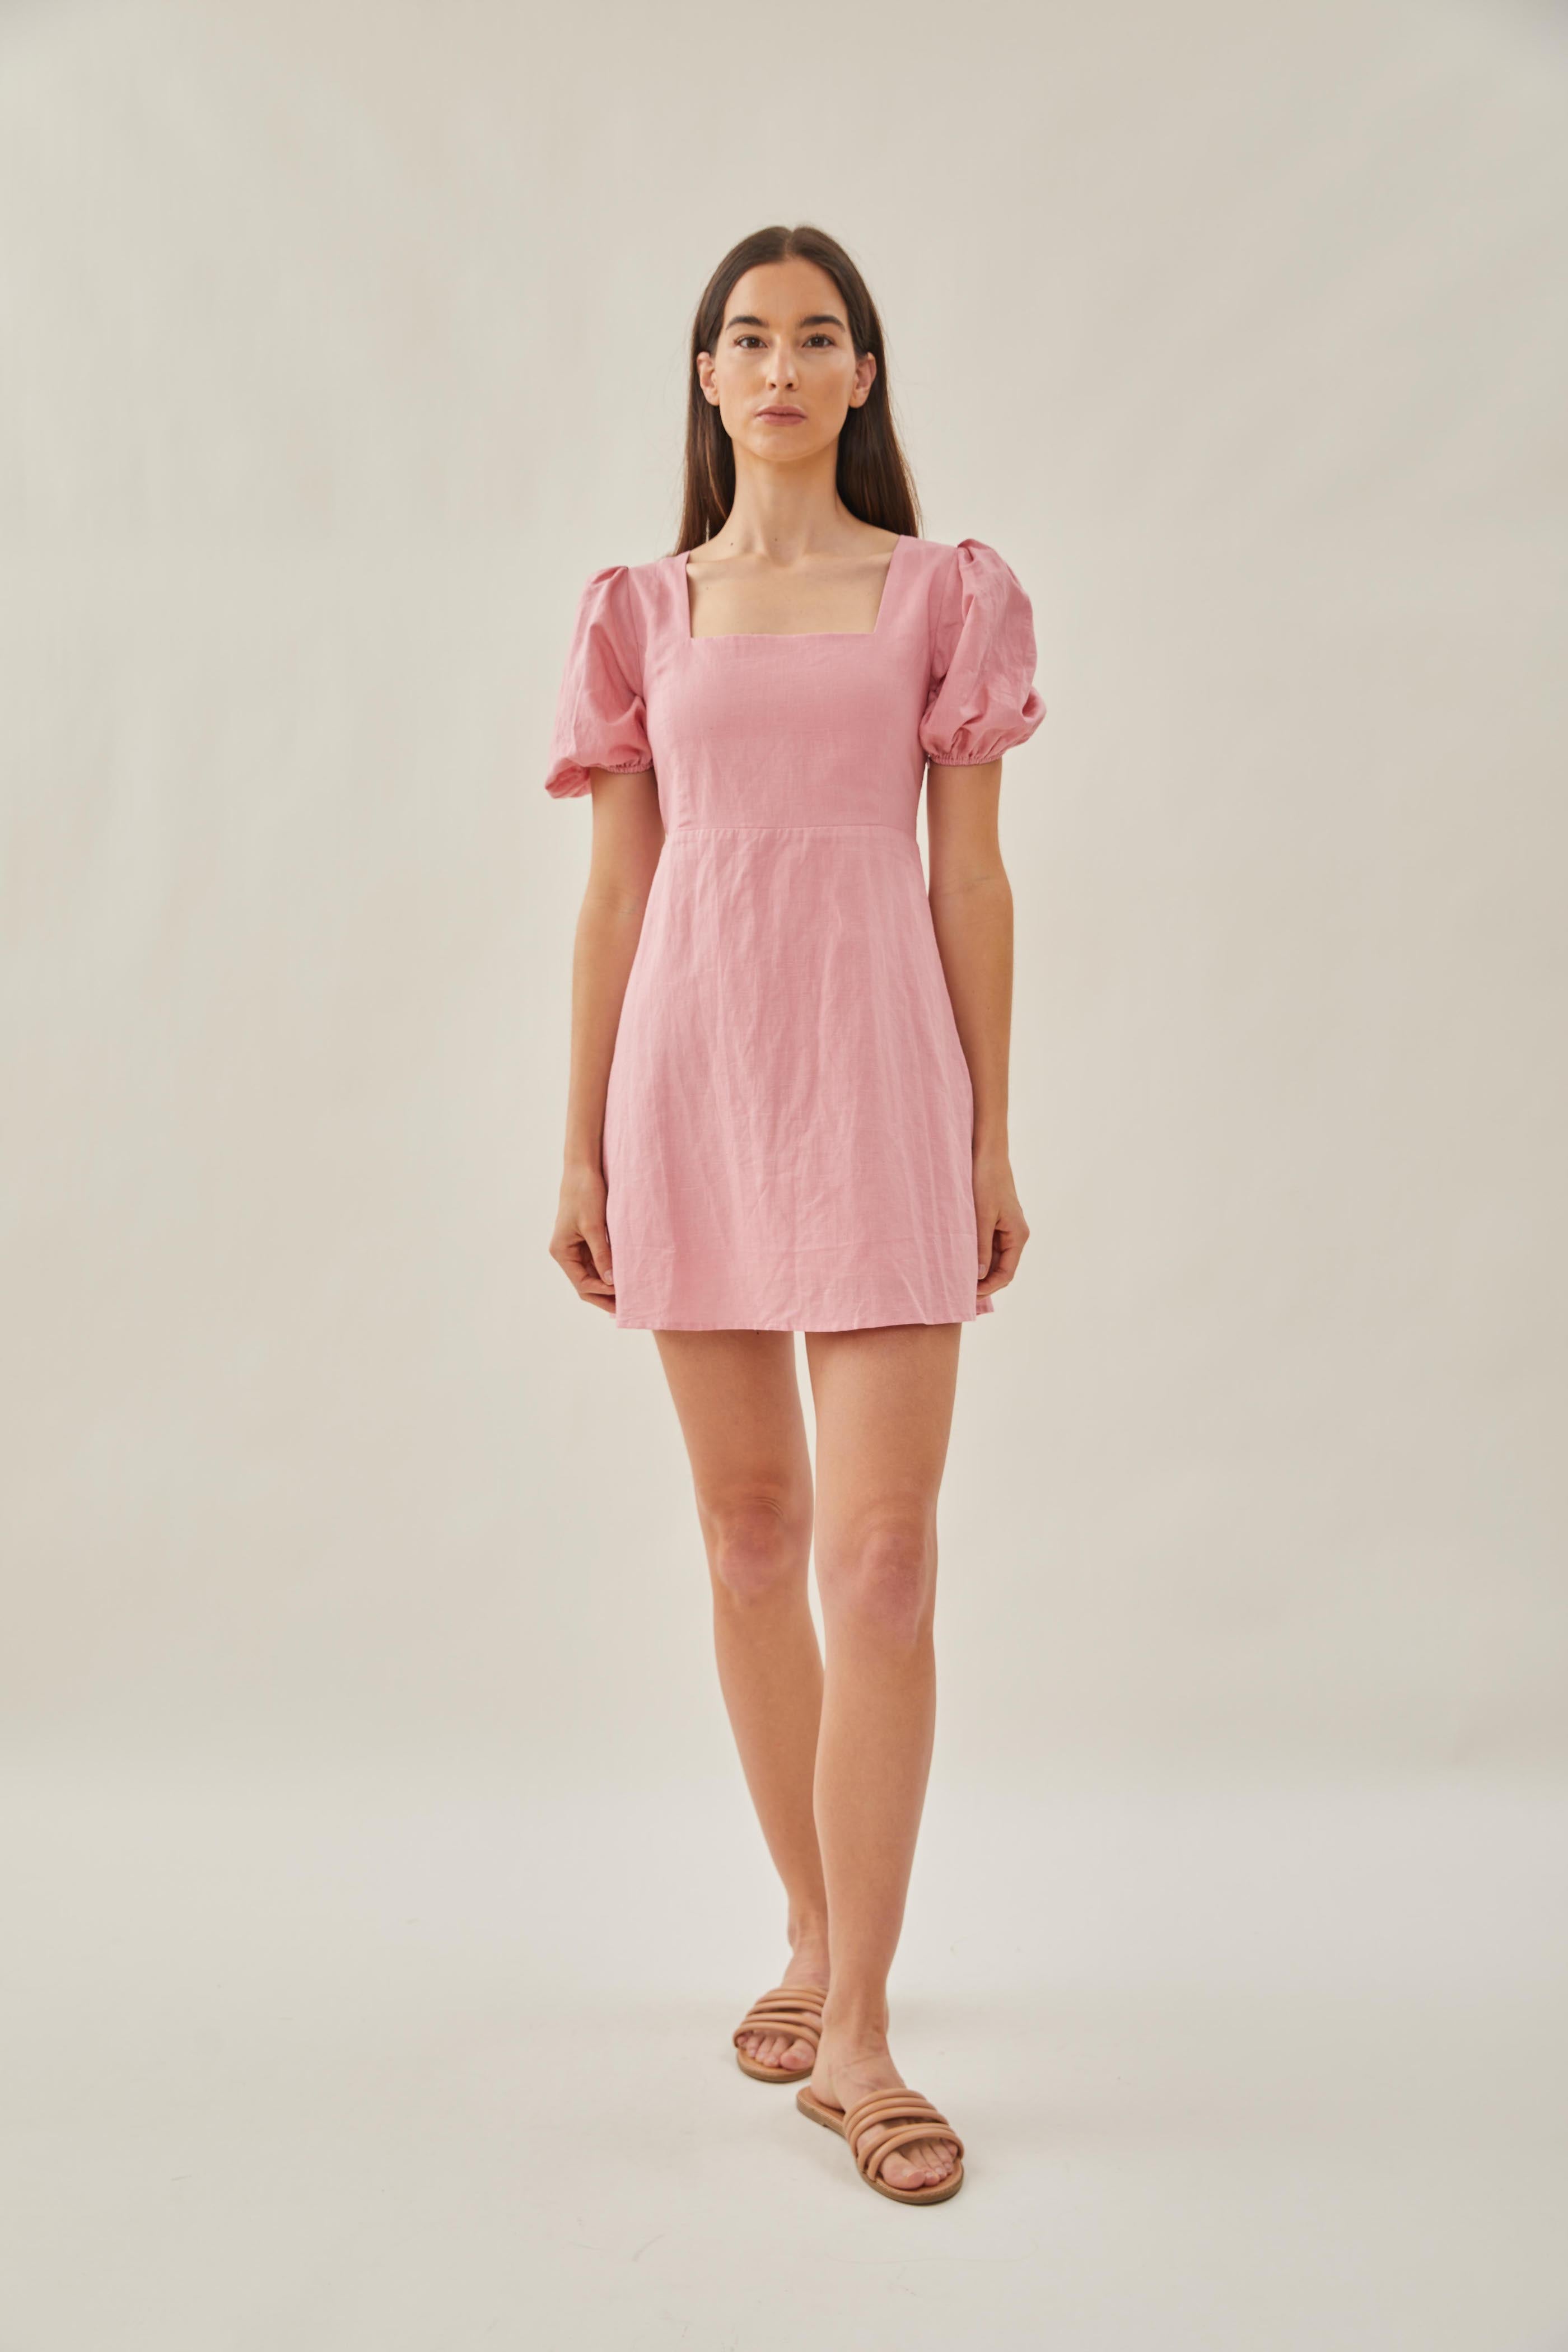 Square Neck Sleeved Mini Dress in Pink